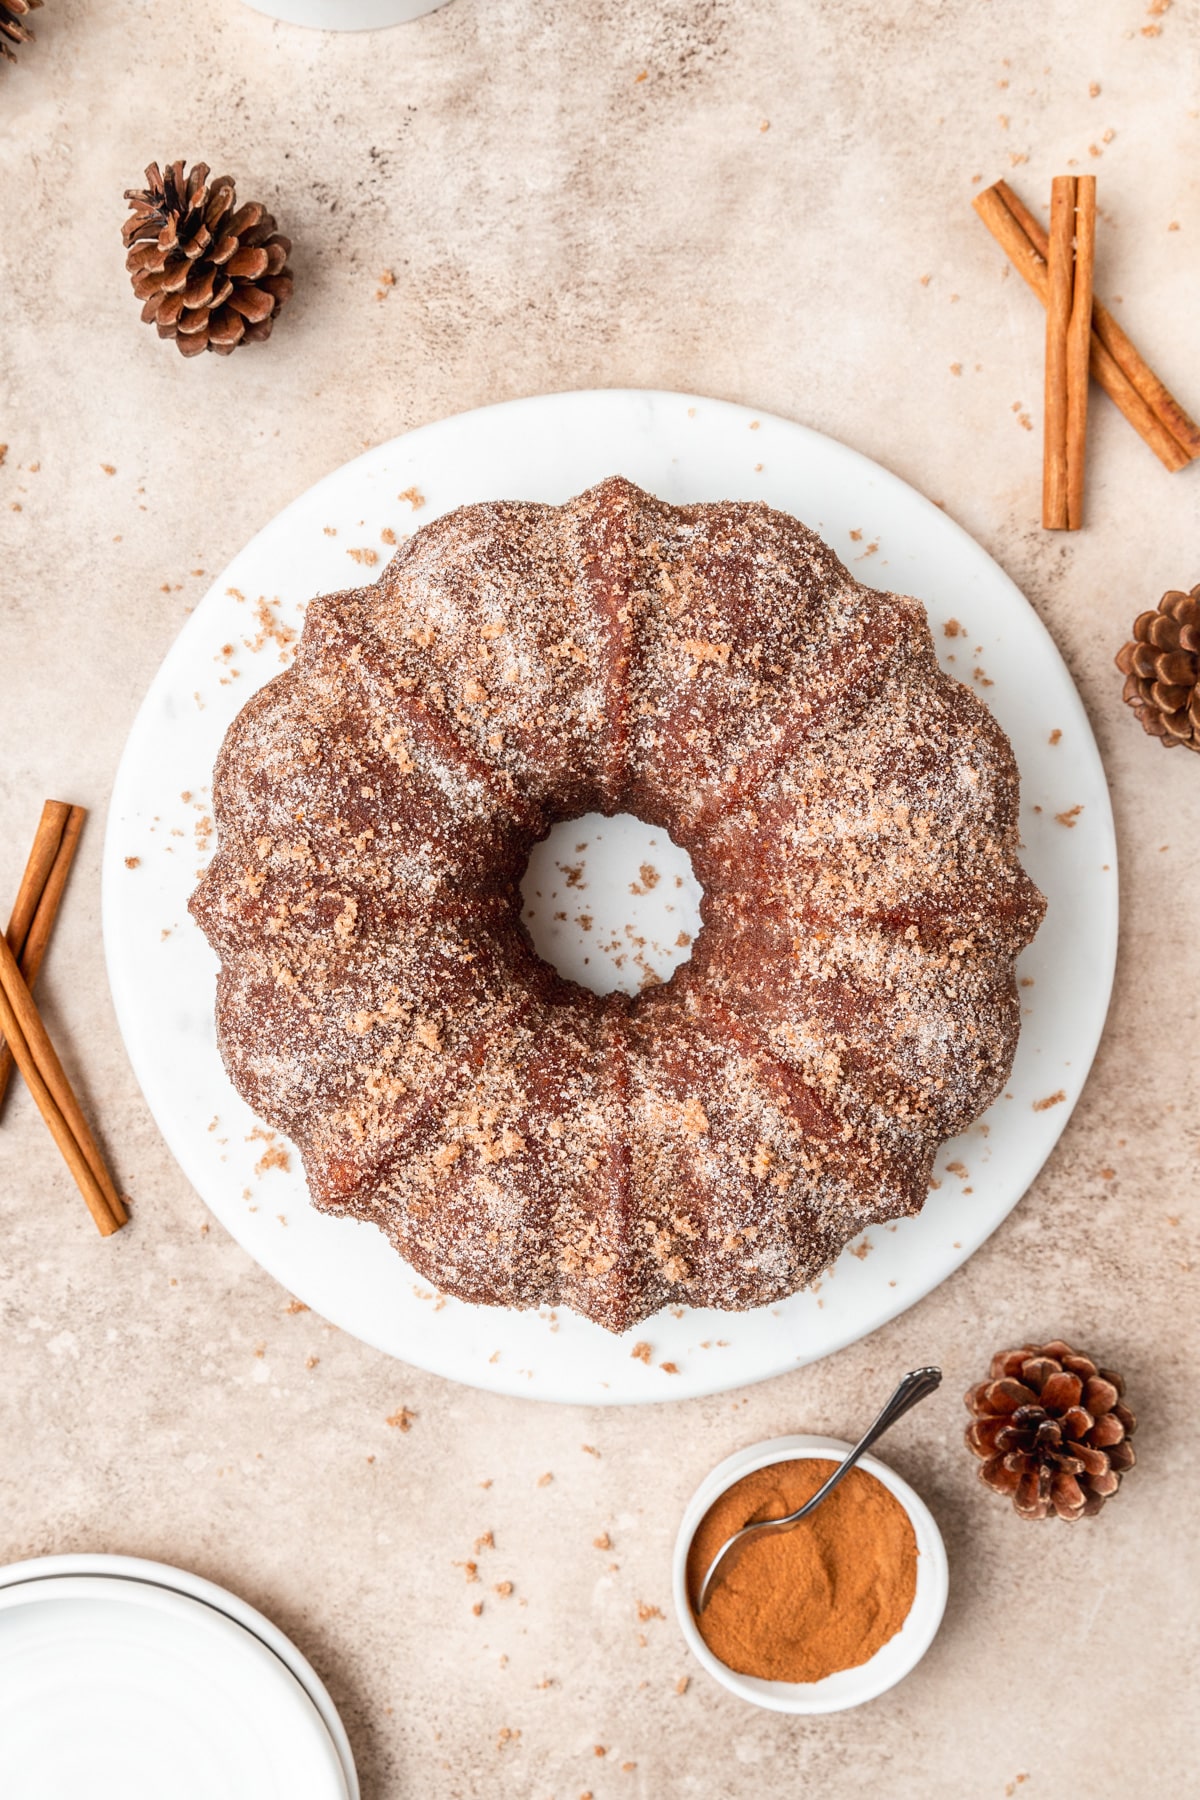 top view of apple cider bundt cake with pecan filling.